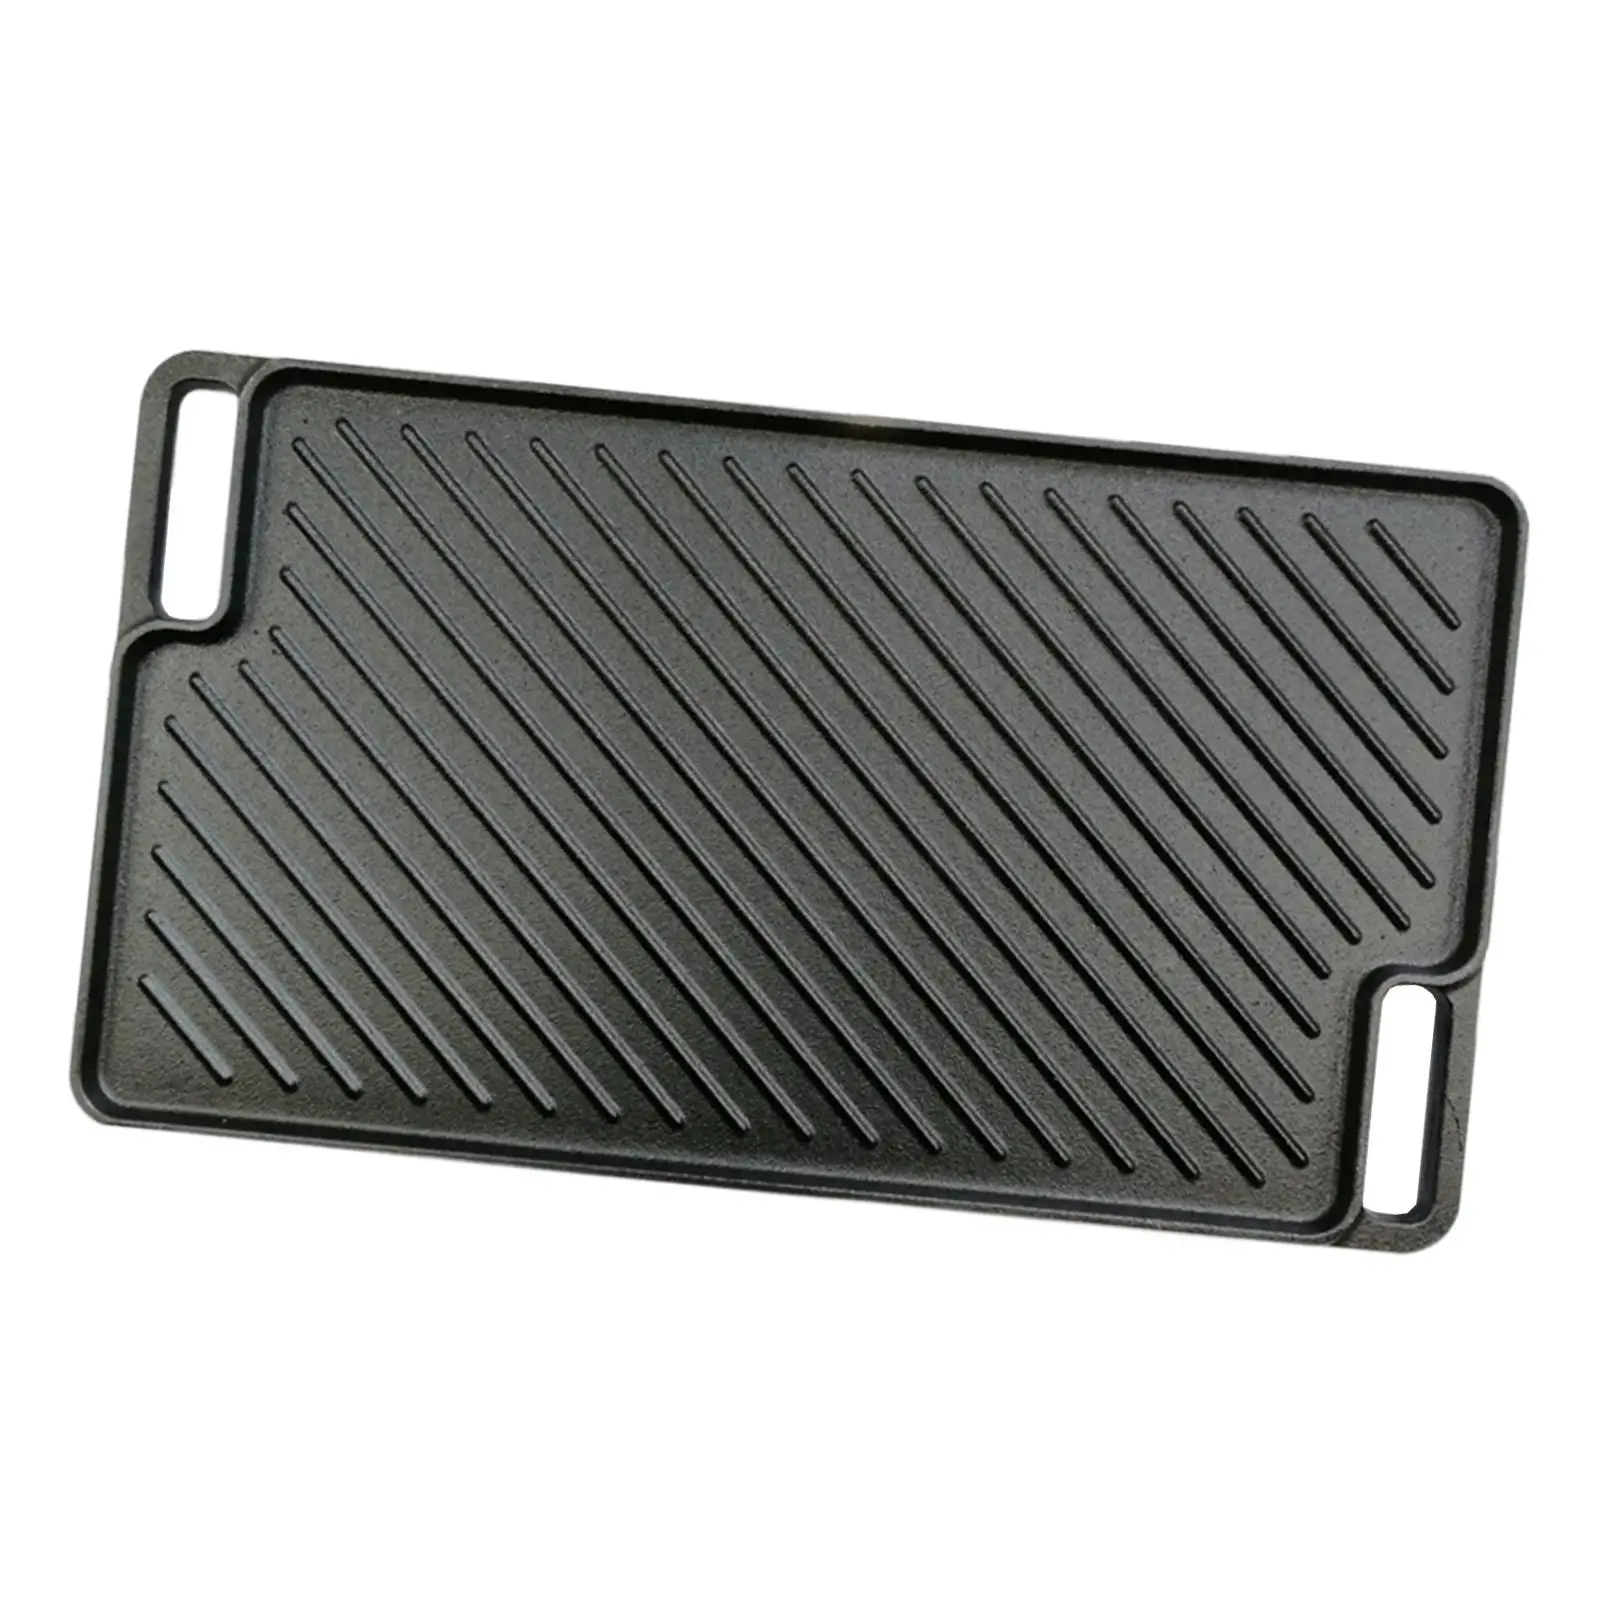 Reversible Grille Made of , Flat And Corrugated Surfaces. Large Griddle Made of